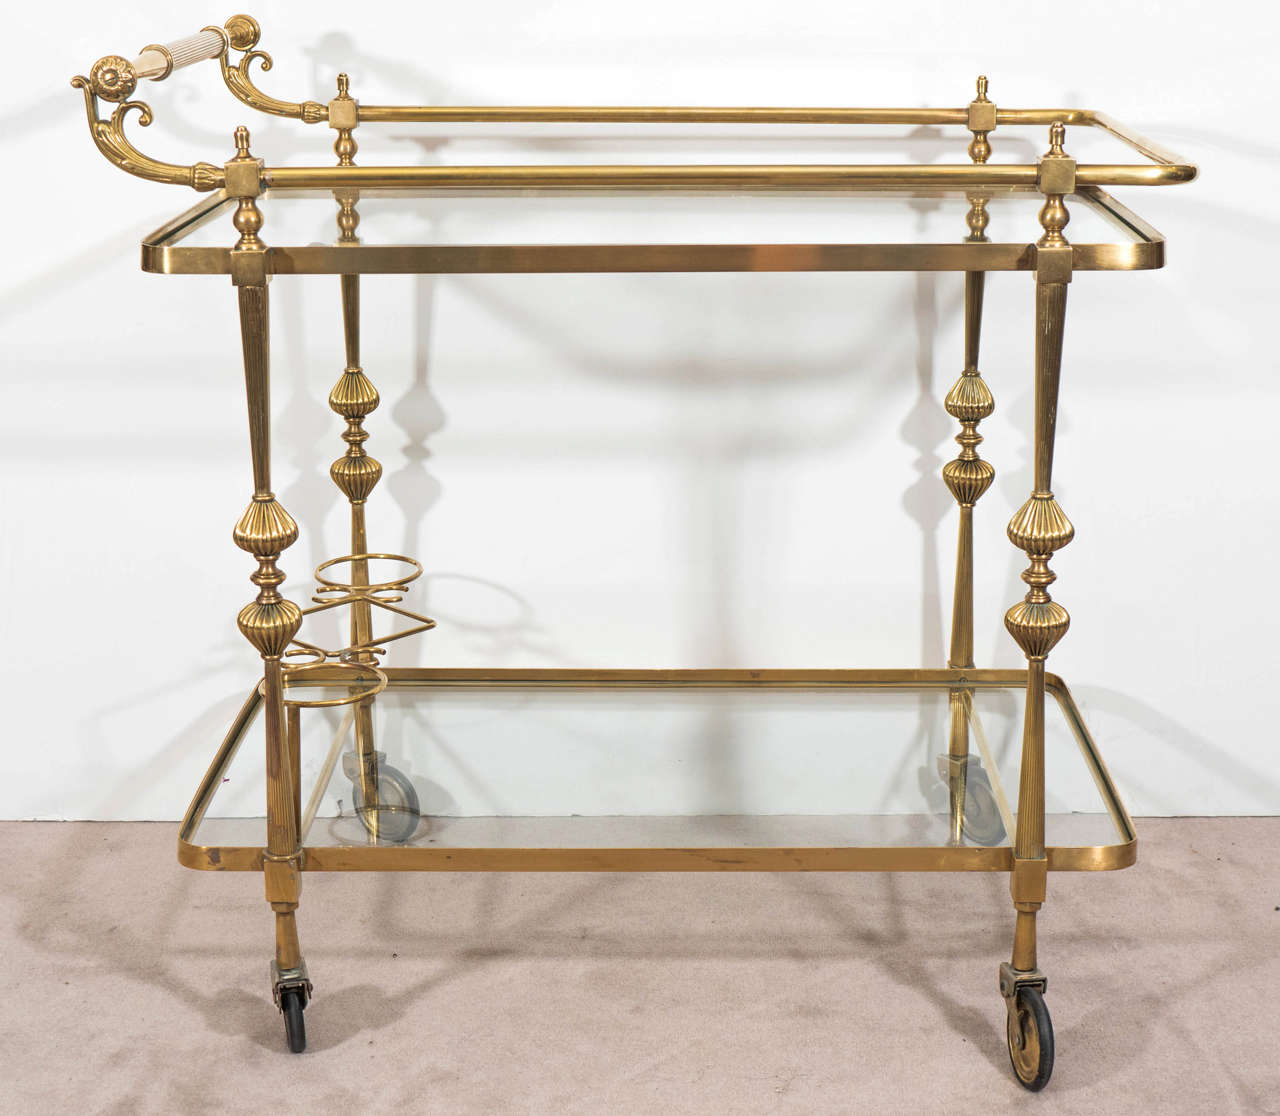 A vintage Hollywood Regency Italian two-tier brass bar cart, manufactured circa 1950's, inset with glass shelves on reeded, round tapering legs with wine holders. Good vintage condition with age appropriate wear and newly replaced glass.